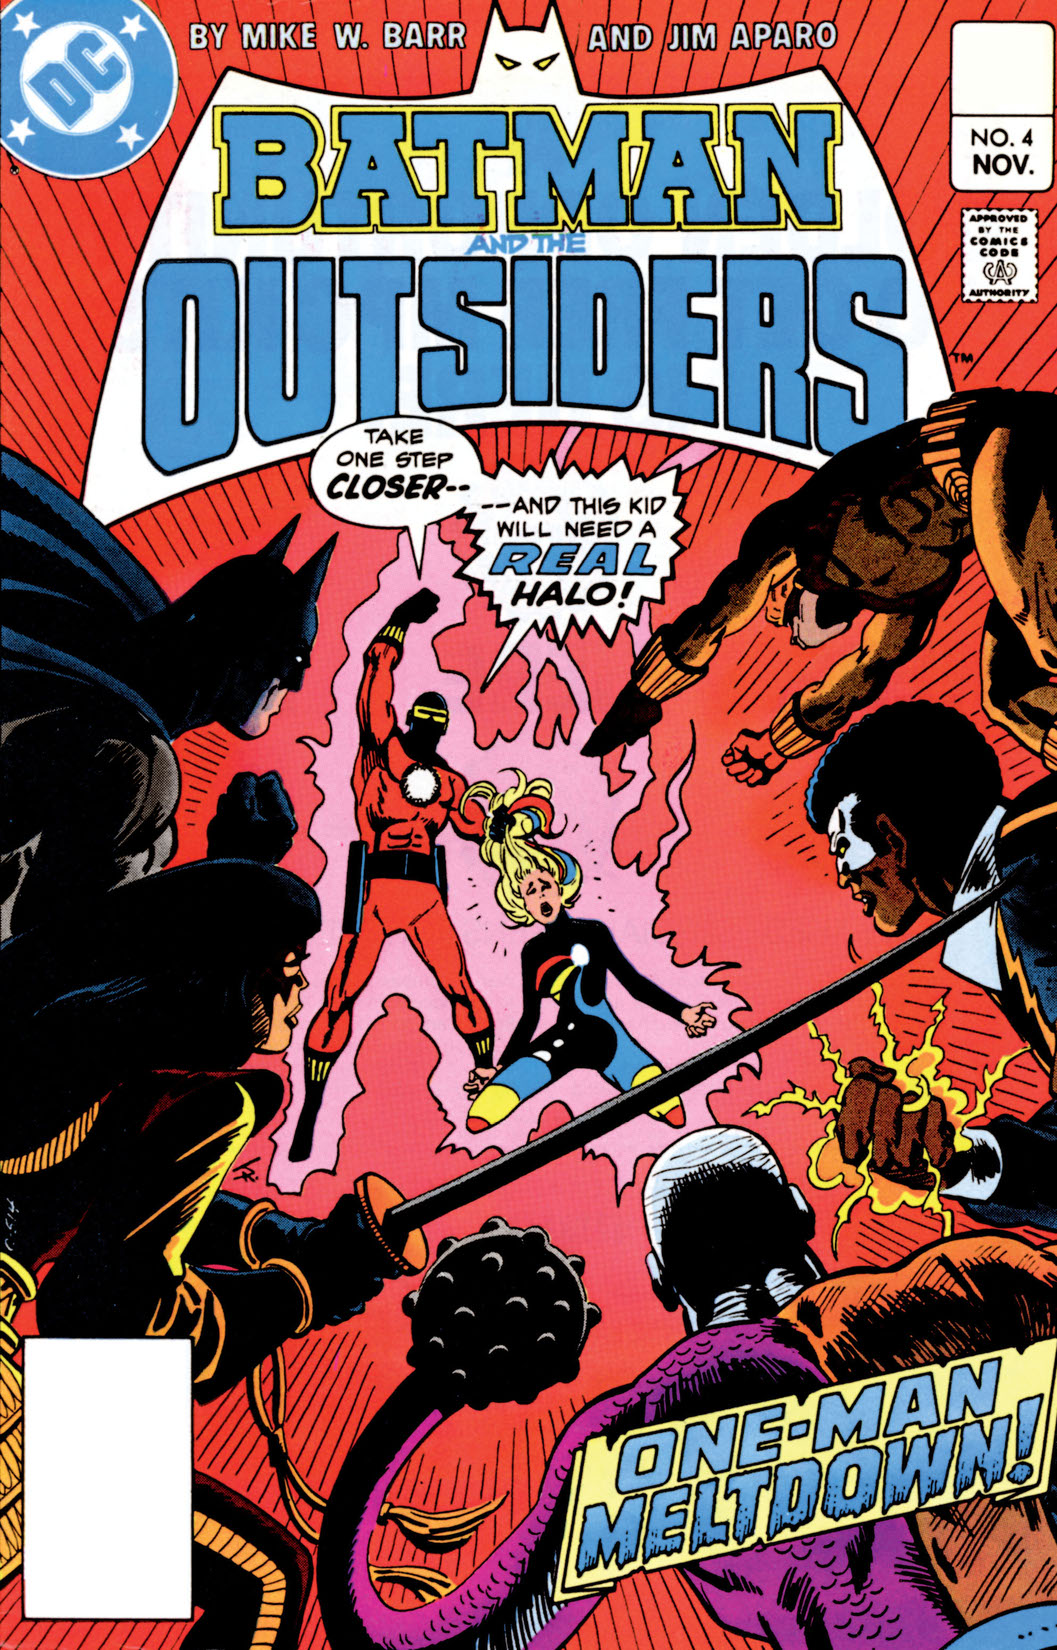 Batman and the Outsiders (1983-) #4 preview images